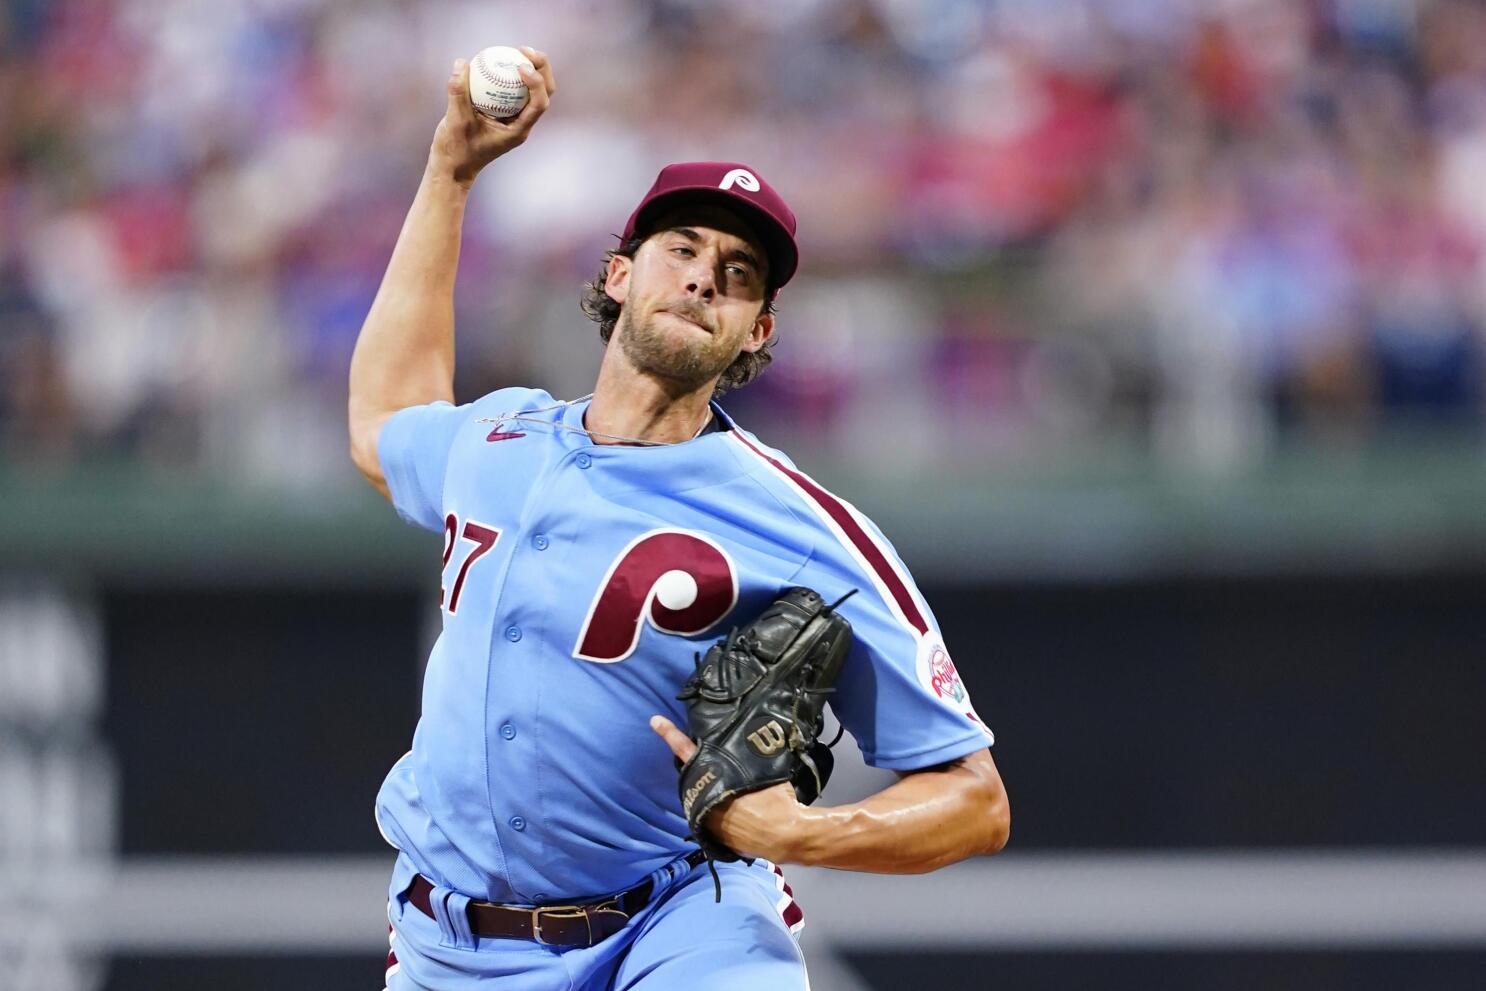 Nola tosses 11-strikeout, 5-hit shutout as Phils sweep Reds